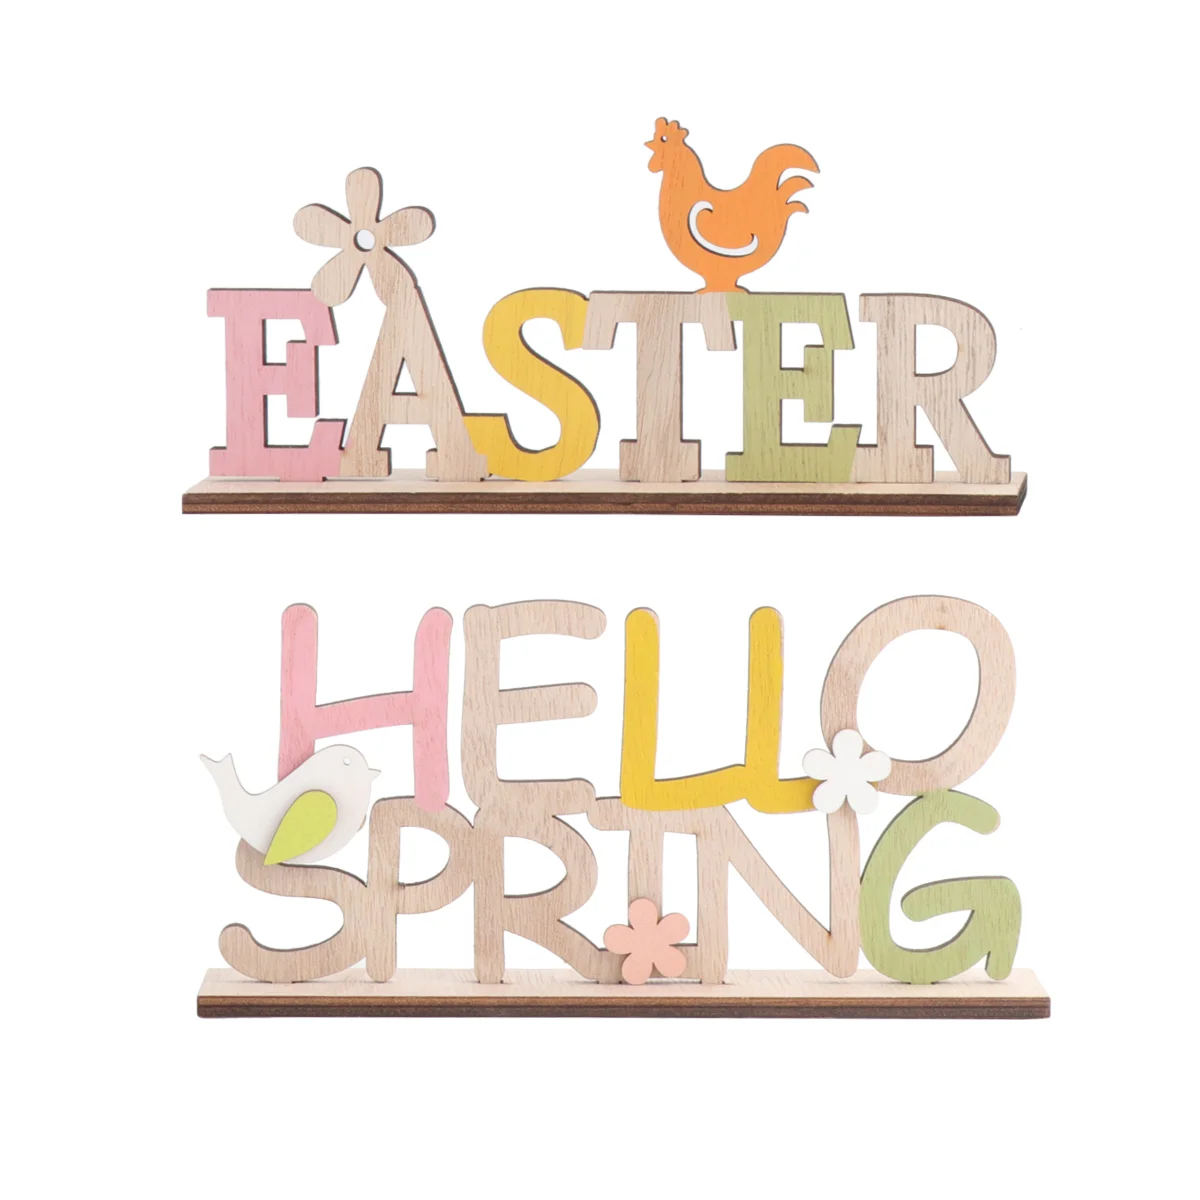 

Easter Table Wooden Wood Sign Ornament Spring Desktop Signs Decor Decorations Figurine Decoration Chick Centerpiece Tabletop